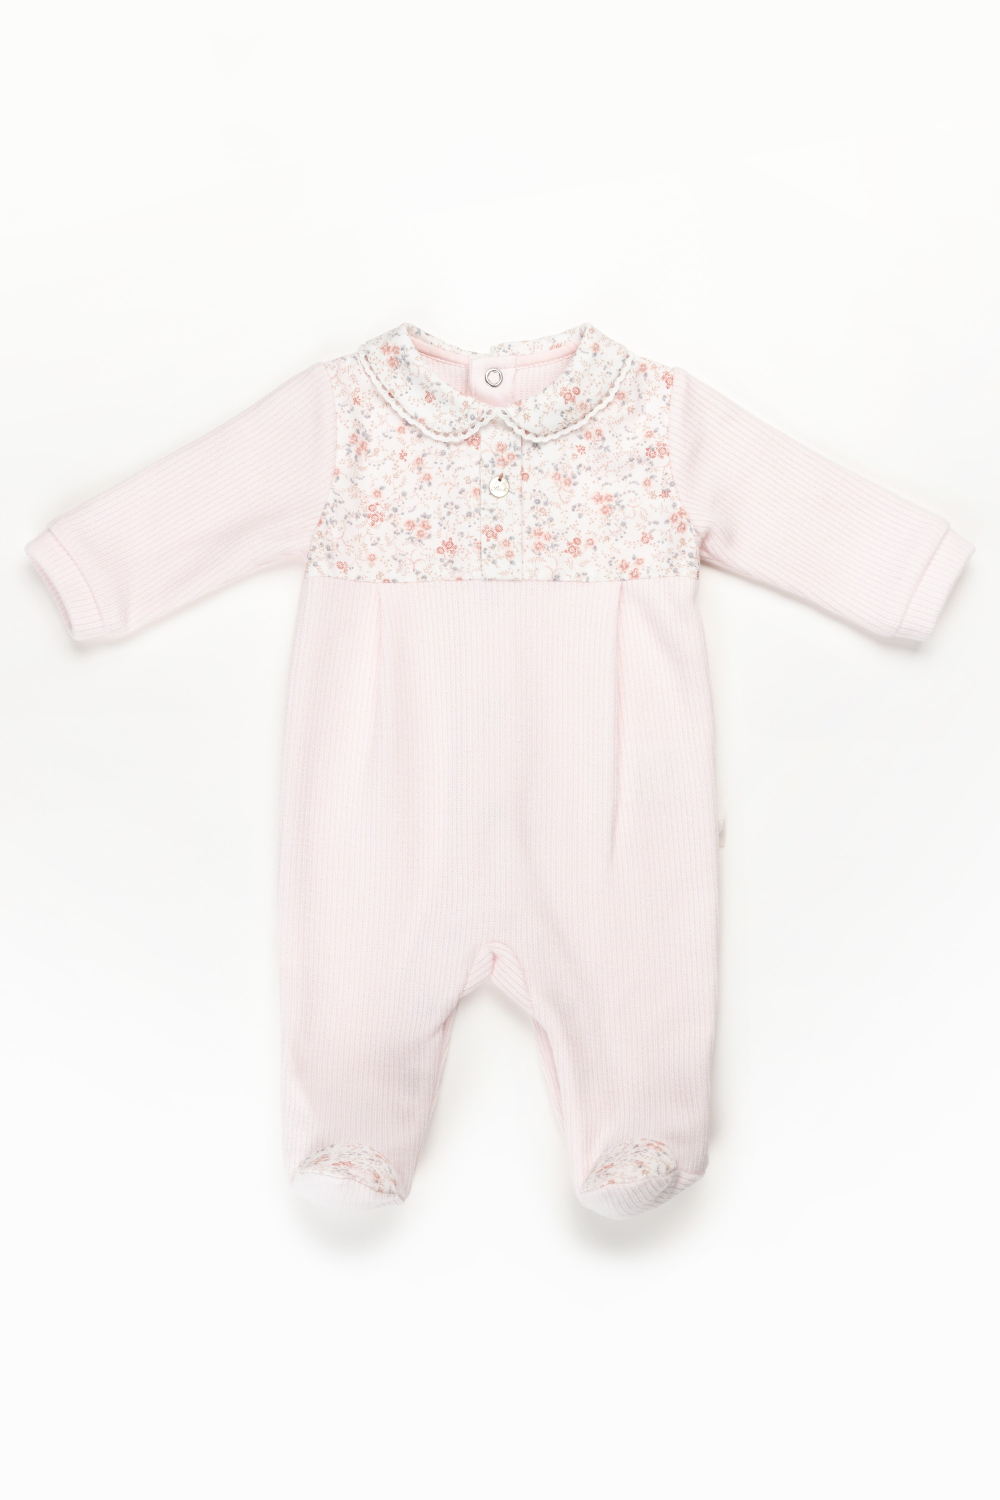 Pure pink flower baby outfit